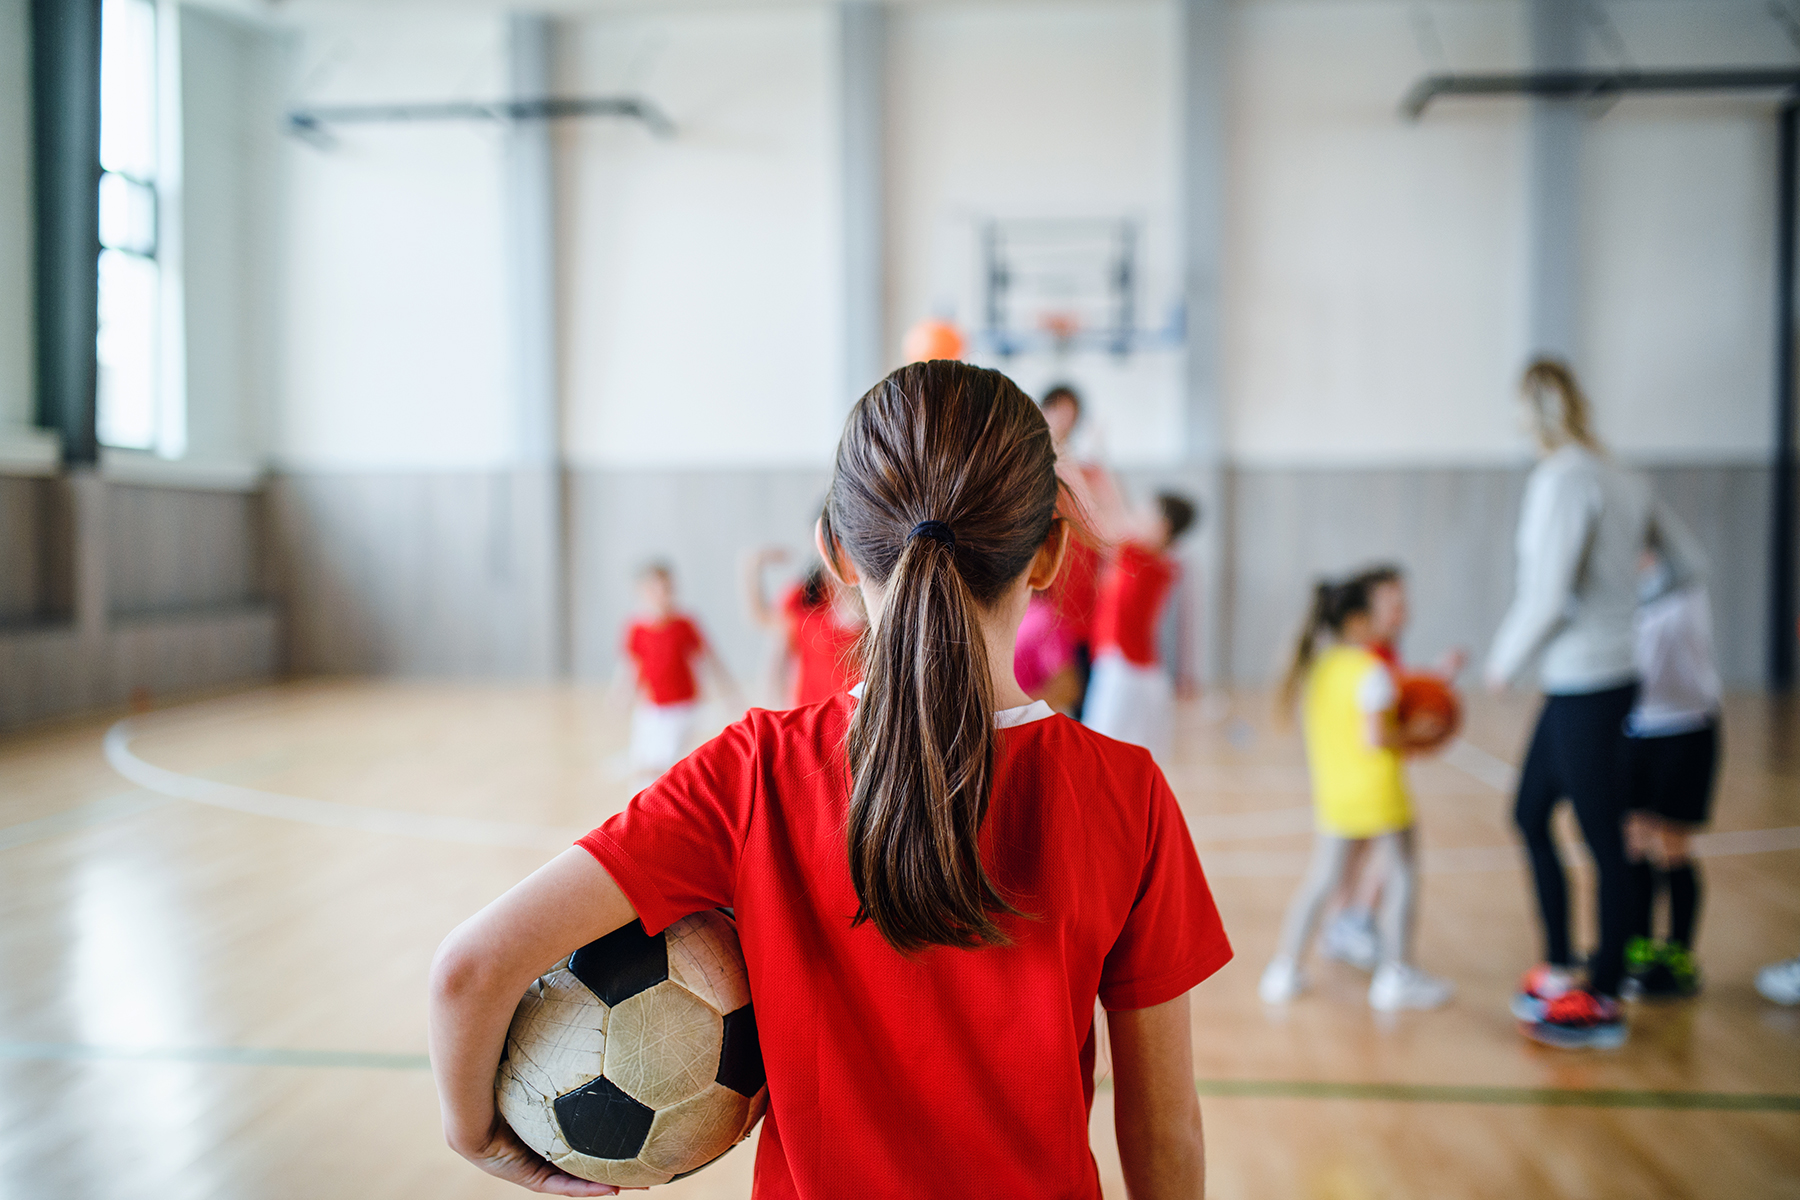 A photo of a young girl with her back to the camera, standing in a sports hall with a football under her arm. There are other children in the background